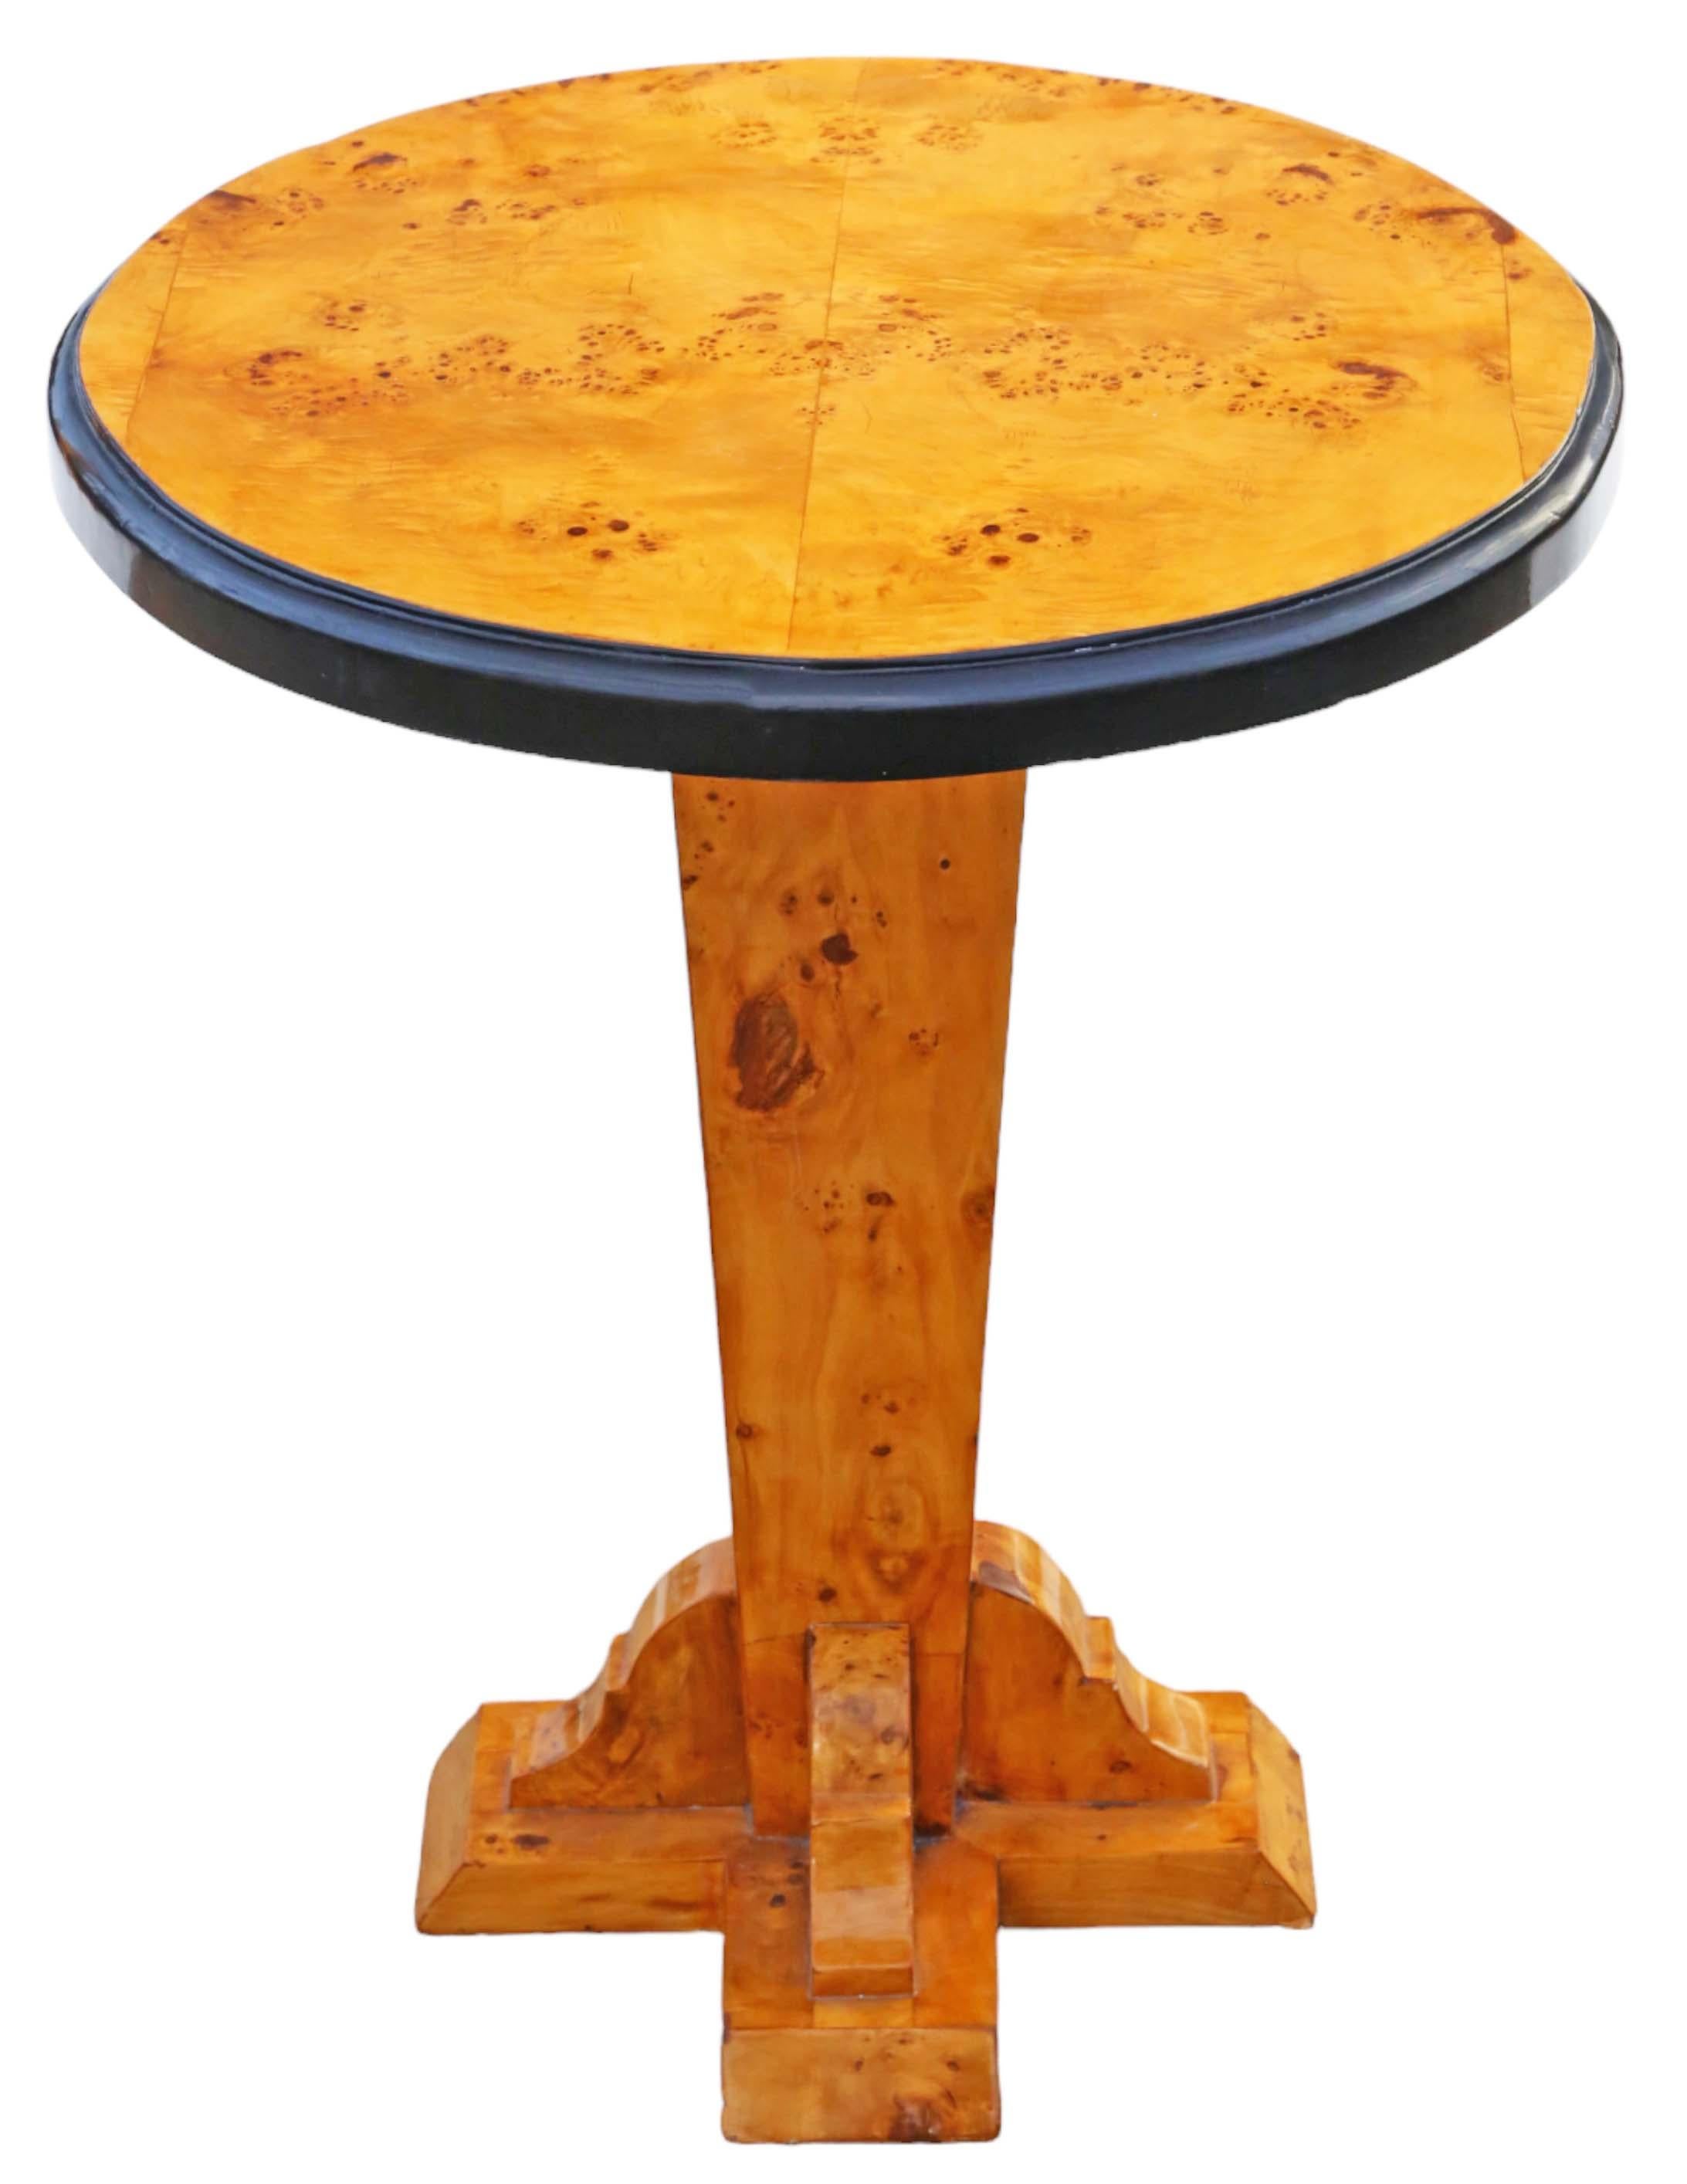 Vintage late 20th Century burr yew pedestal lamp or side table.

The table is solid with no loose joints, presenting itself as a charming and rare decorative find.

There is no evidence of woodworm, and the aesthetic would complement the right